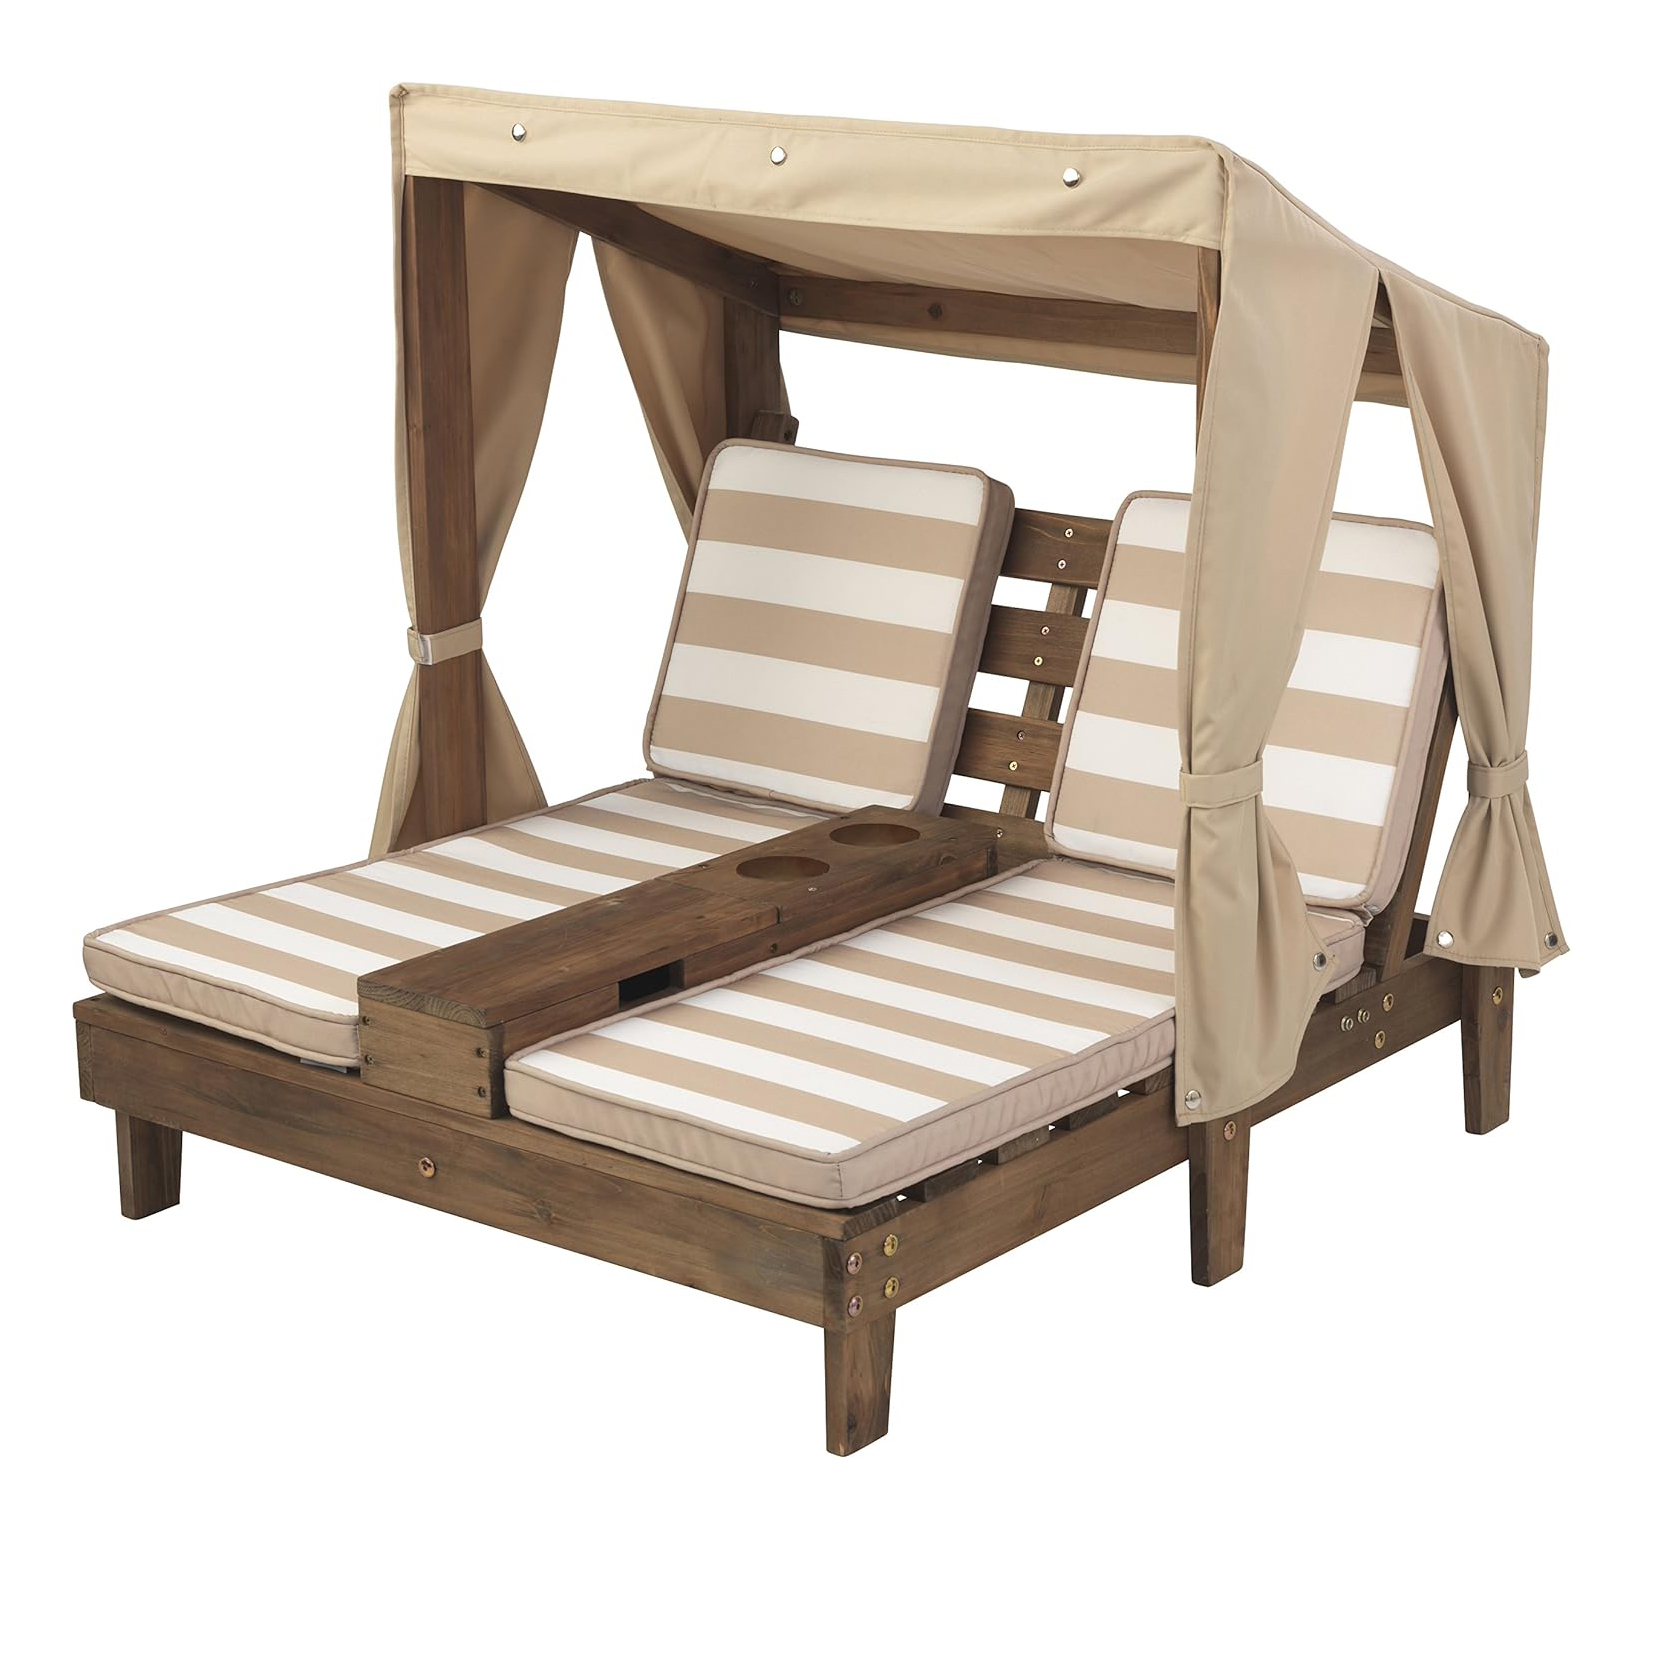 outdoor play lounge set for kids